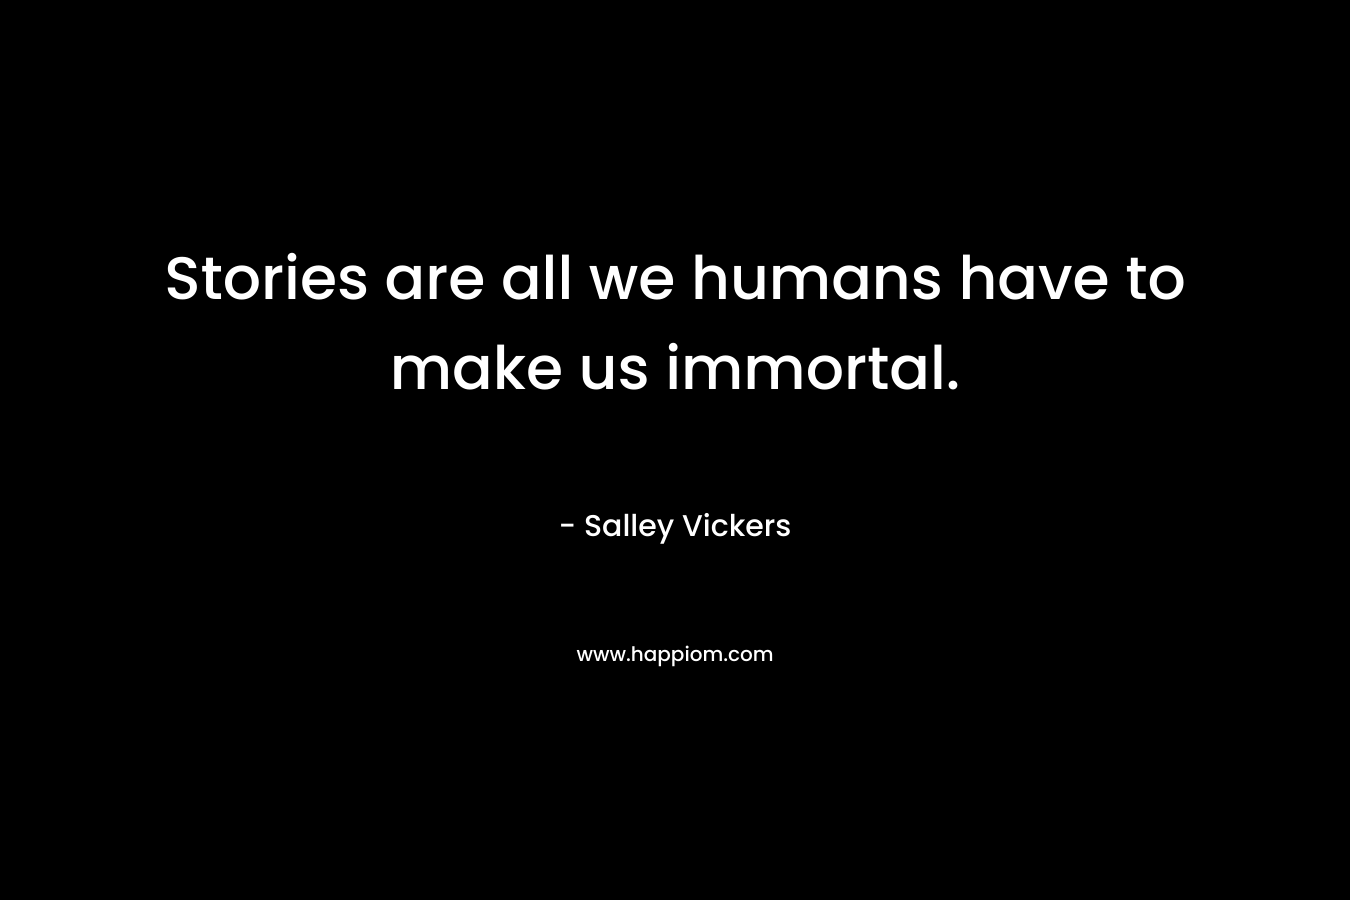 Stories are all we humans have to make us immortal.